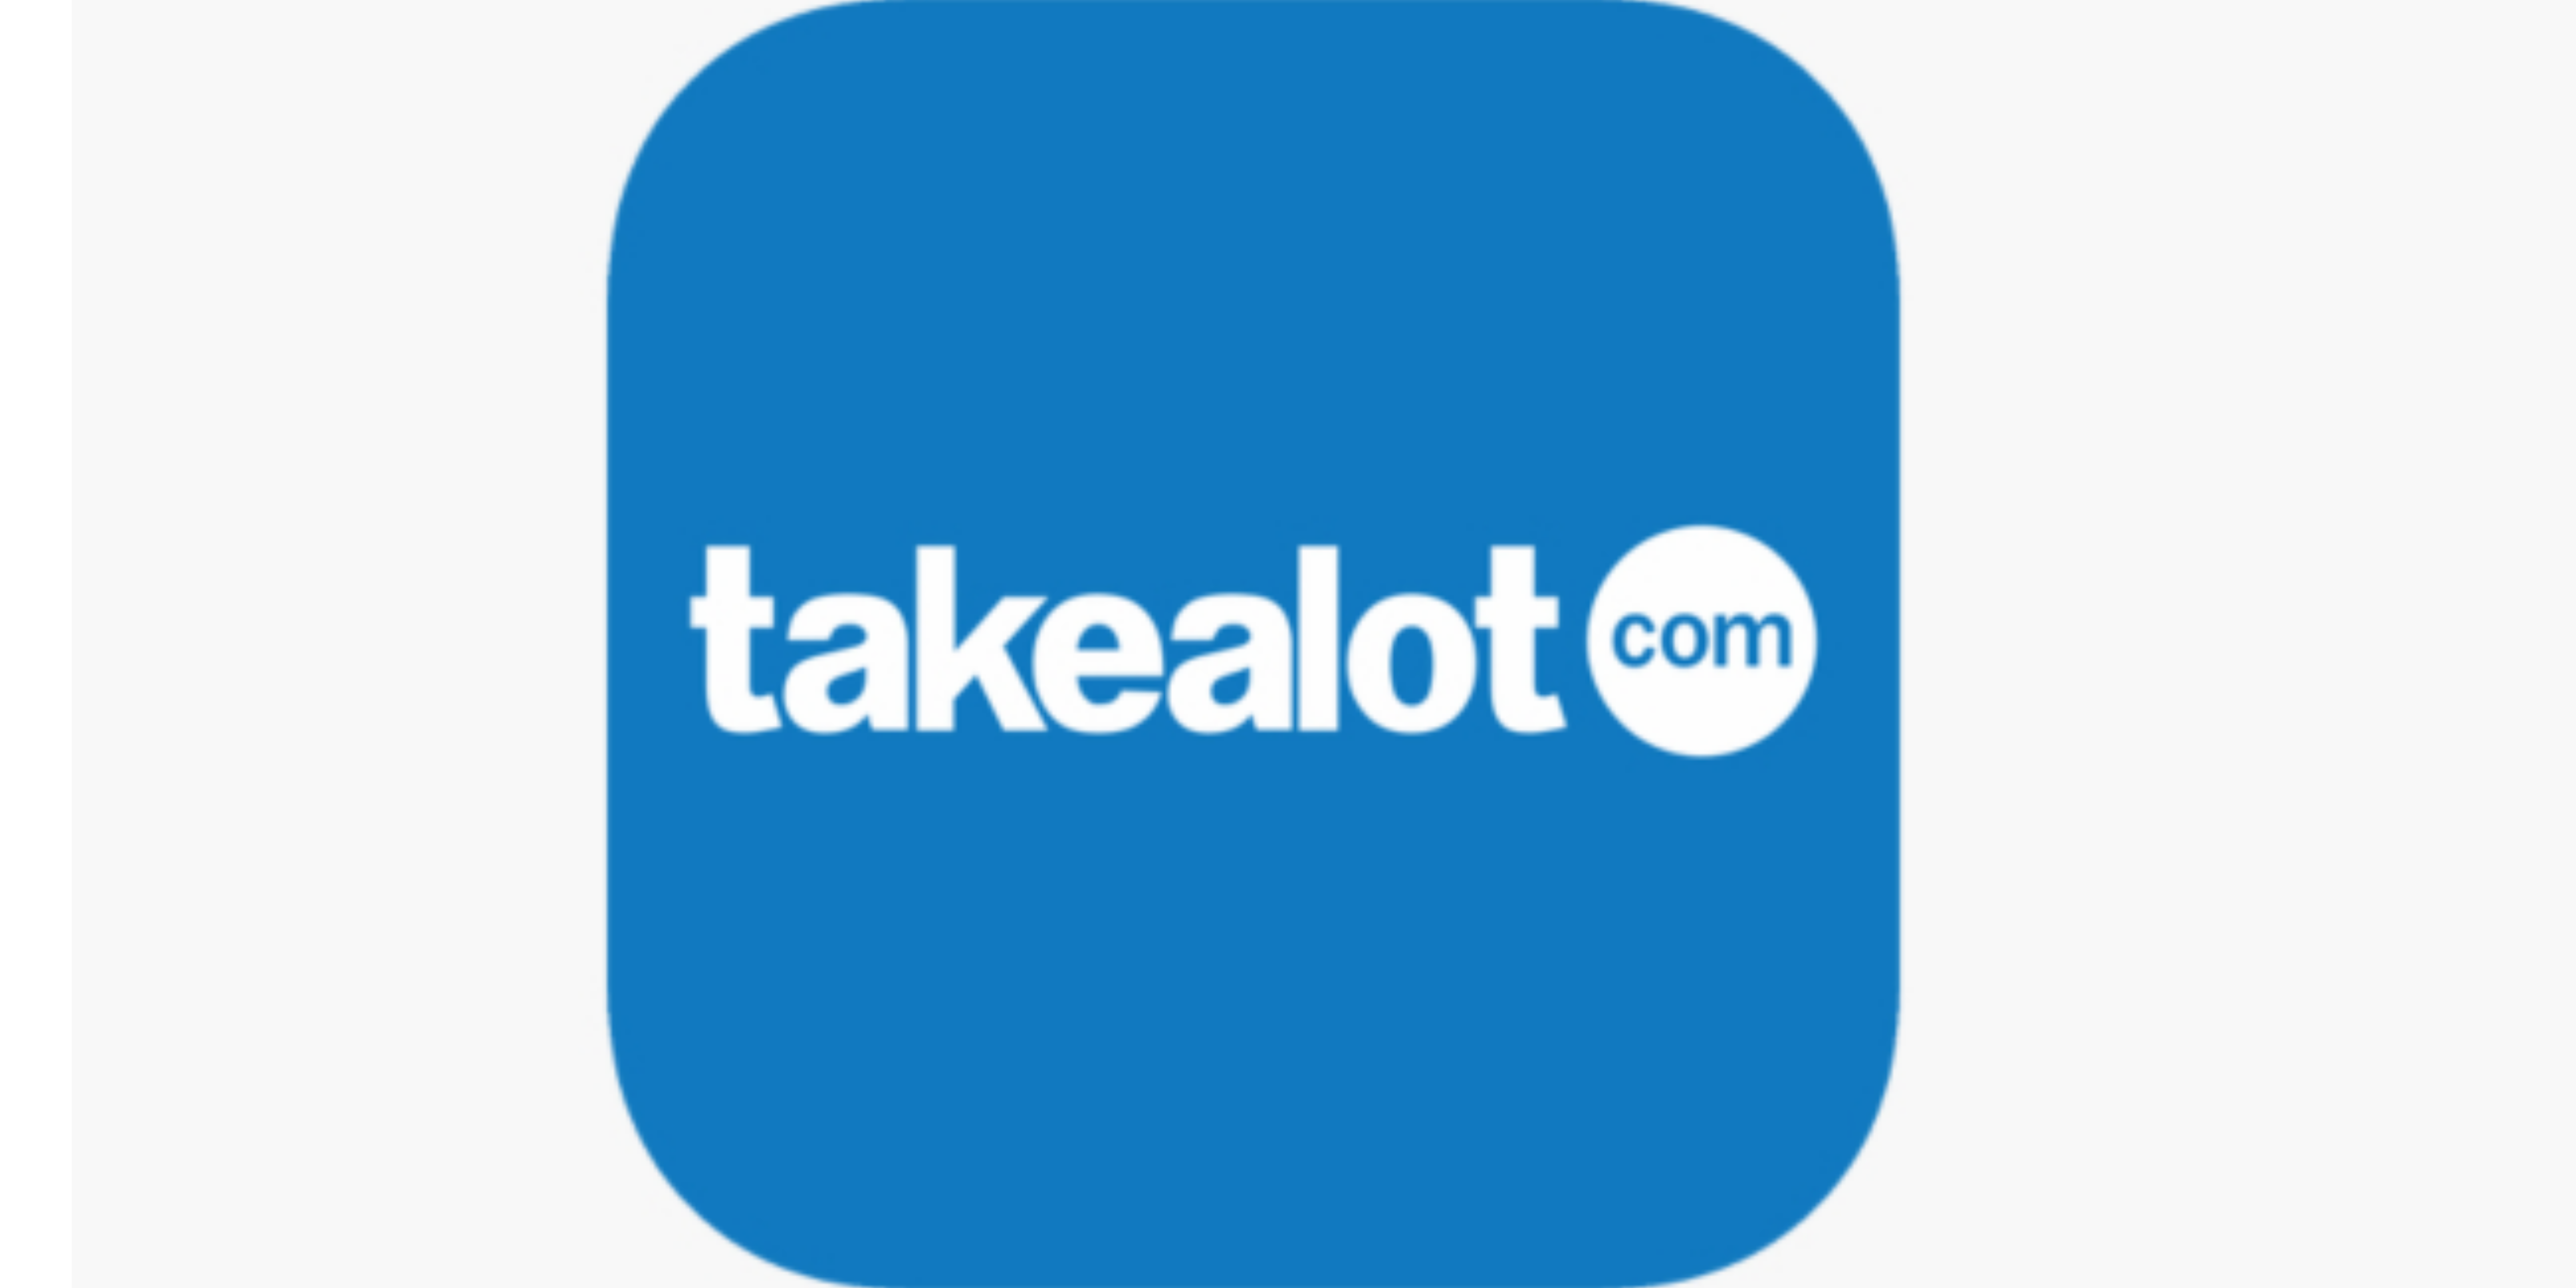 BECOME A DRIVER PARTNER AND JOIN THE TAKEALOT.COM DELIVERY TEAM